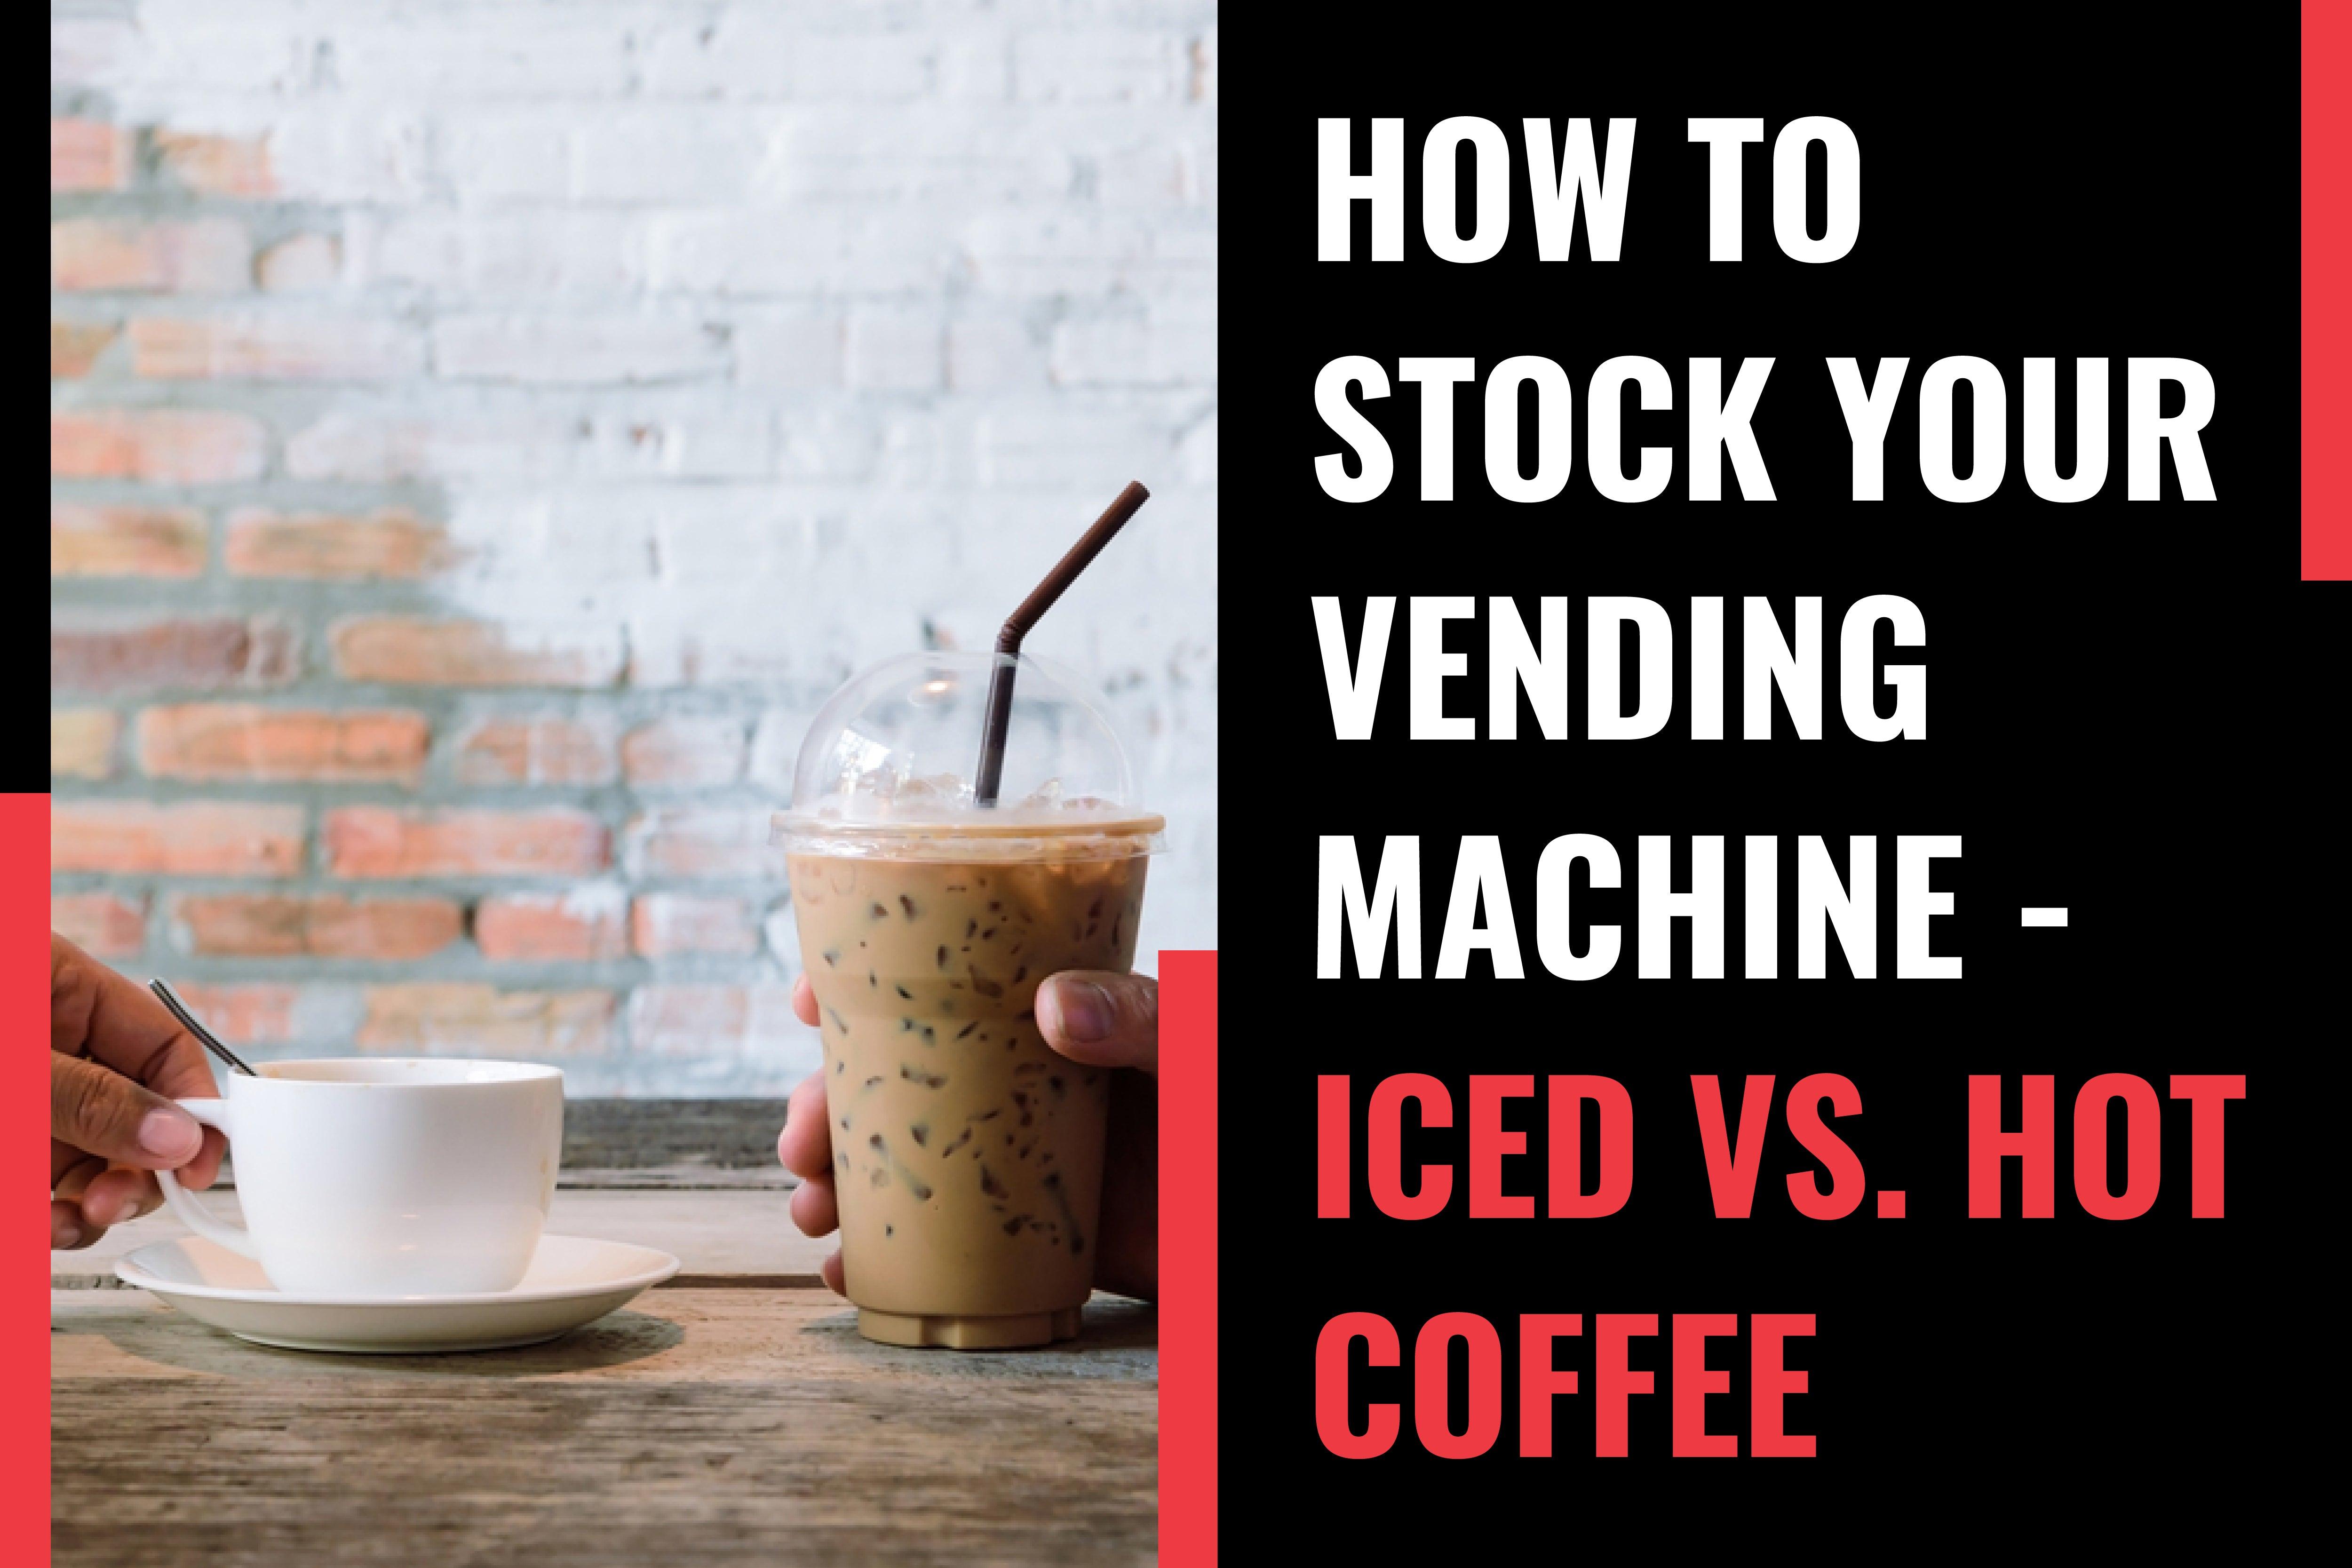 Hot Beverage Vending: How to Stock Your Vending Machine - Iced vs. Hot Coffee -  Vendnet